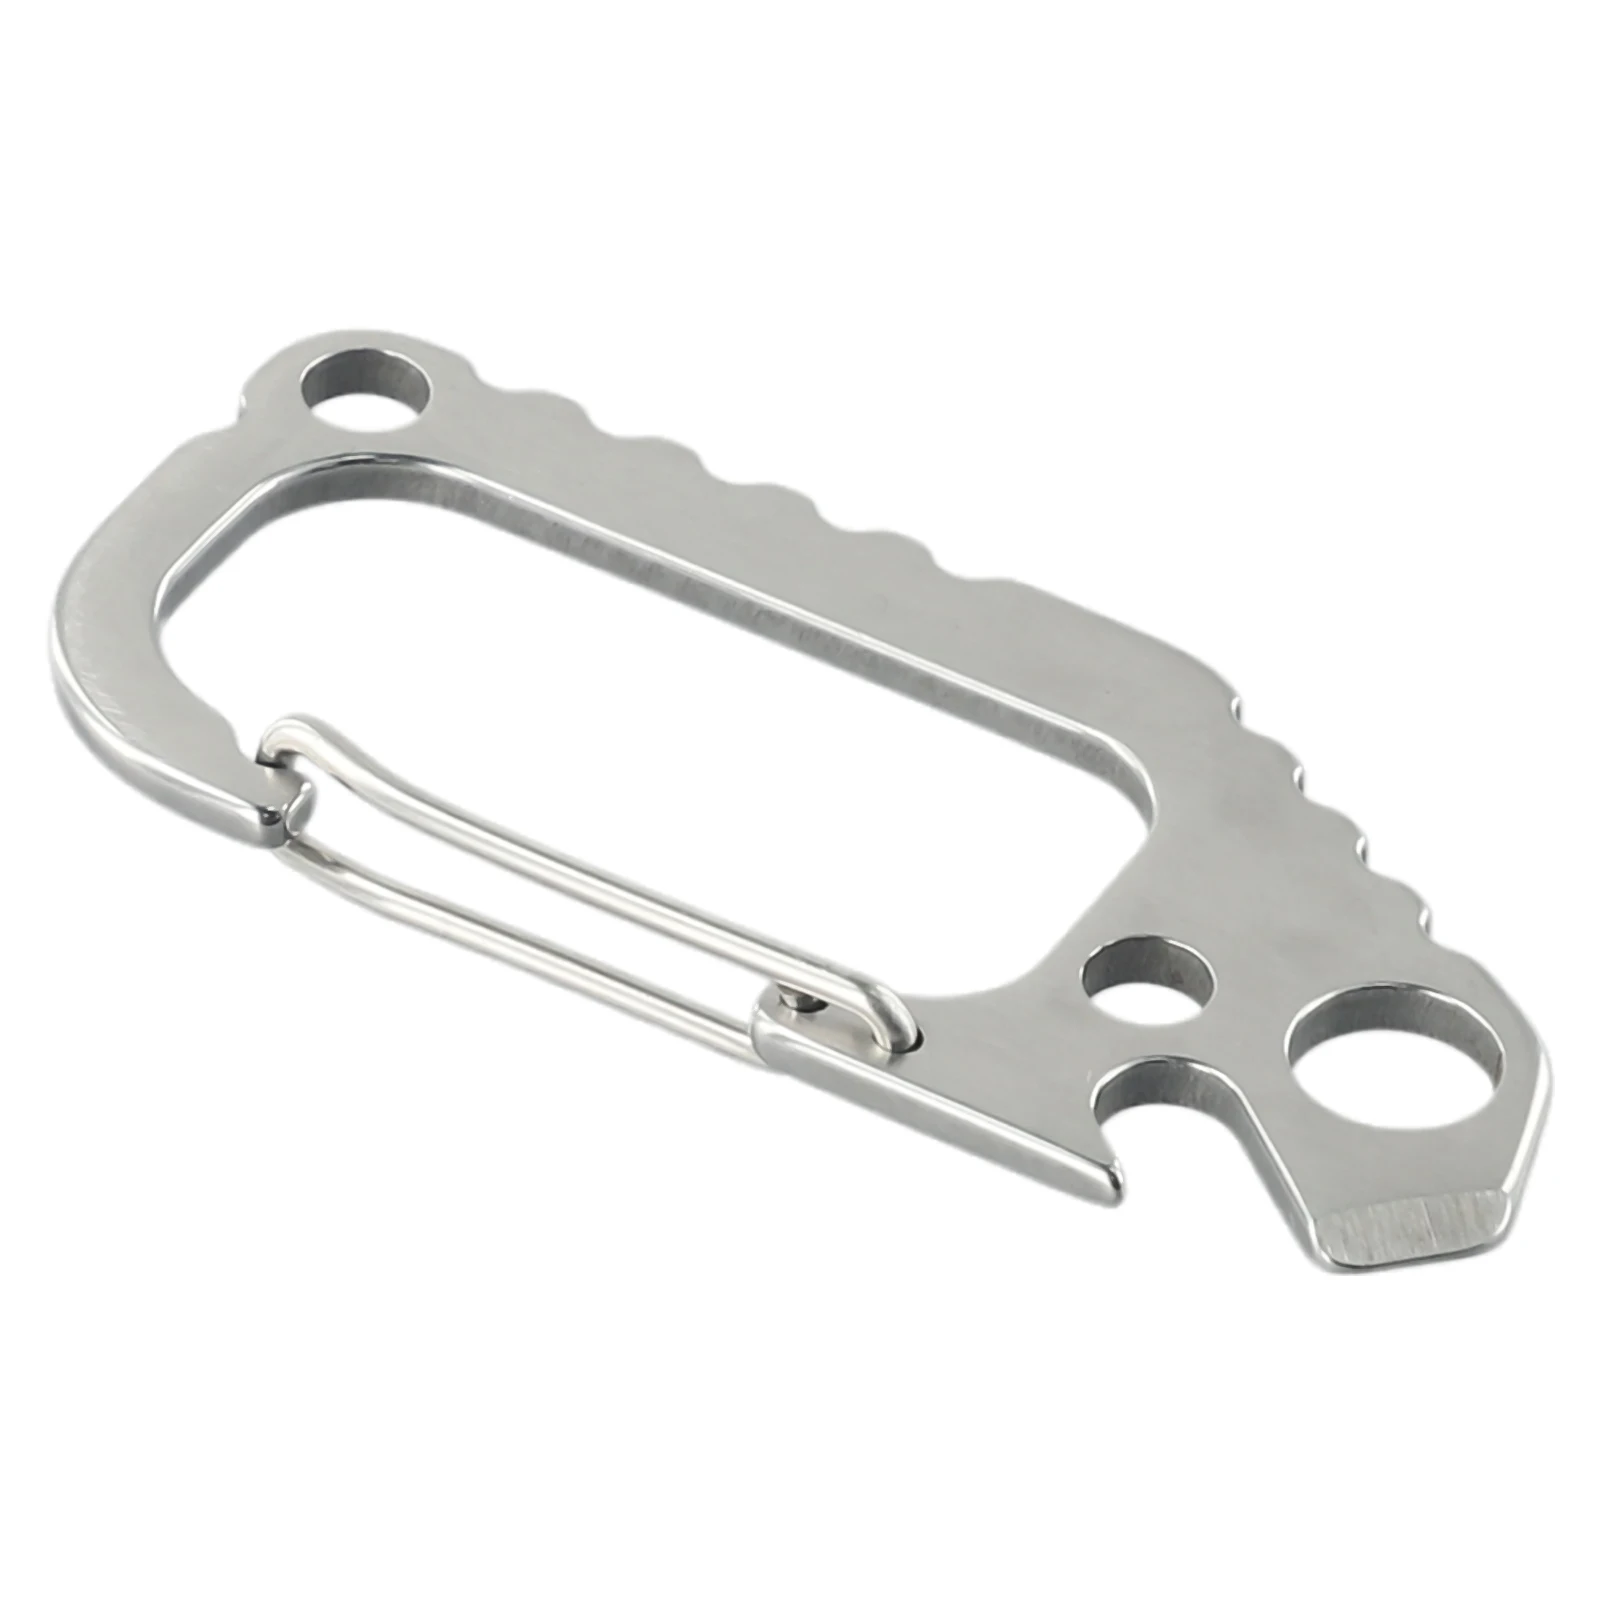 

Equipment Carabiner 1pc Buckle D Ring Lock Mountaineering Rappelling Rock Climbing Snap Sports Stainless Steel